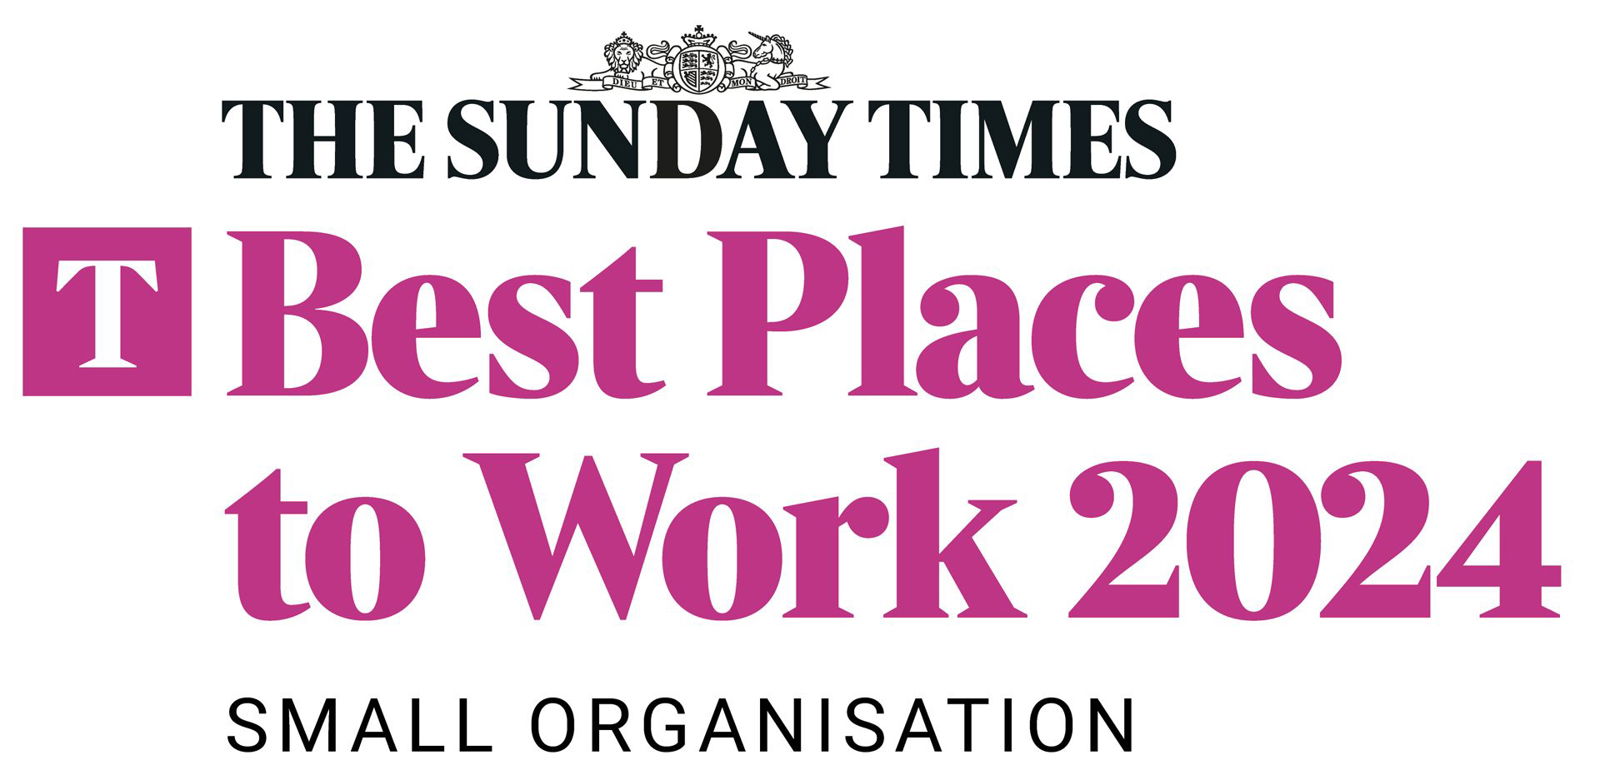 The Sunday Times, Best Places to Work 2024 Award, Big logo